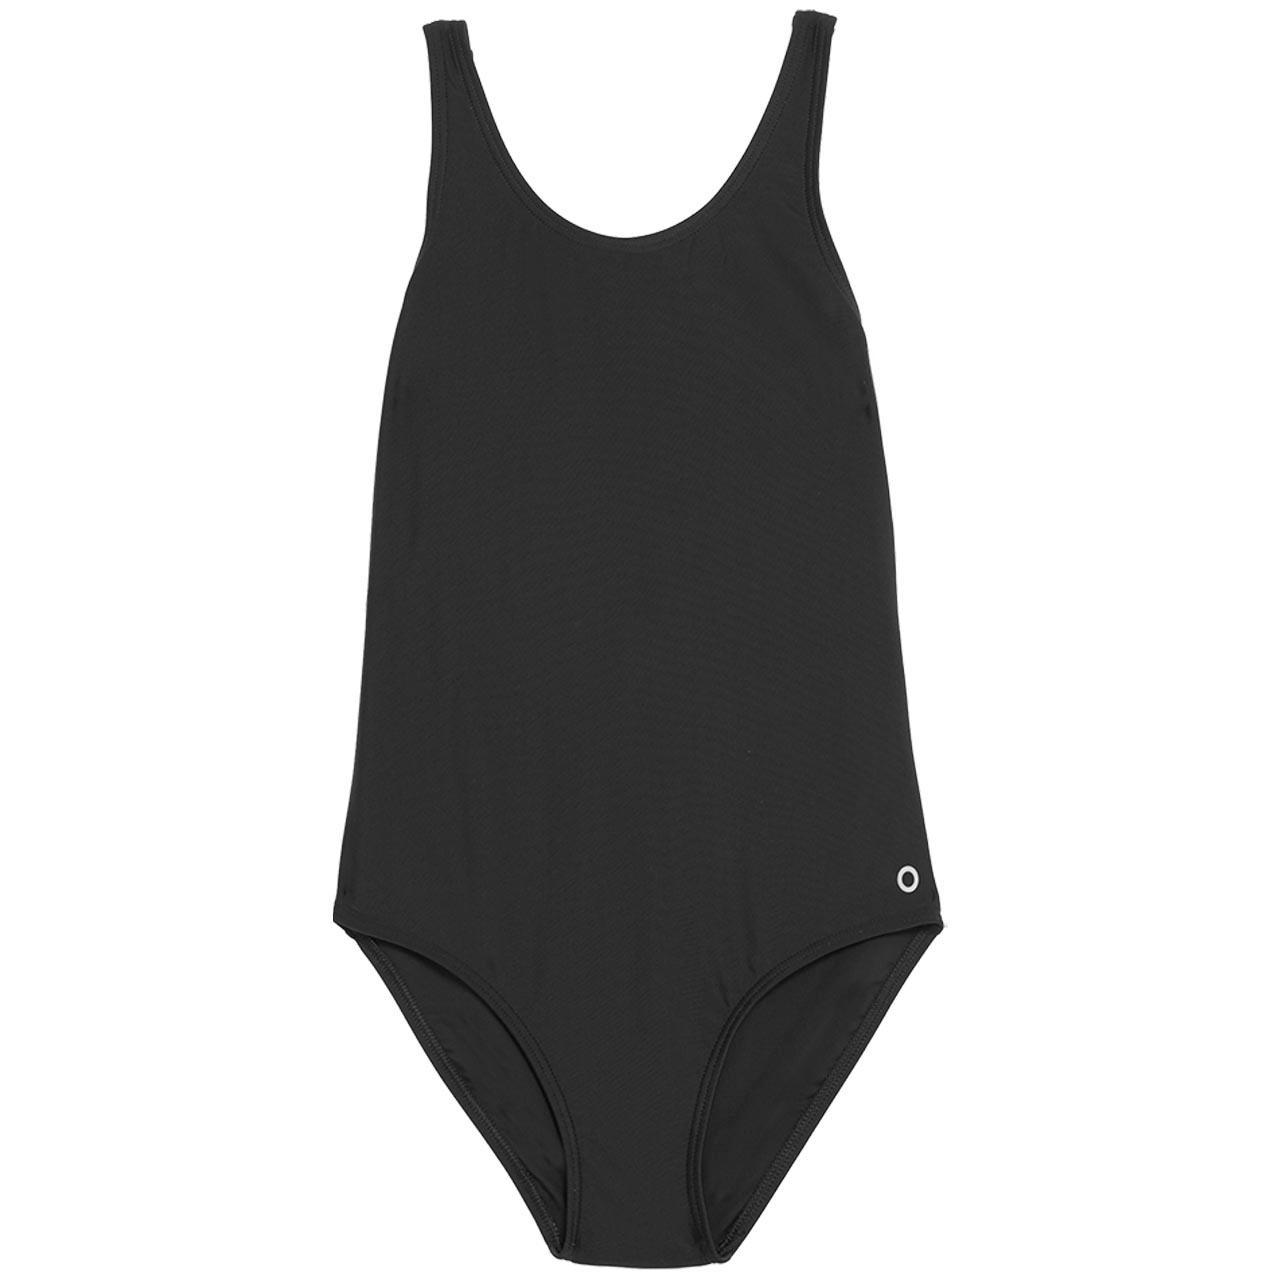 M&S Recycled Sports Swimsuit, 12-13 Years Black